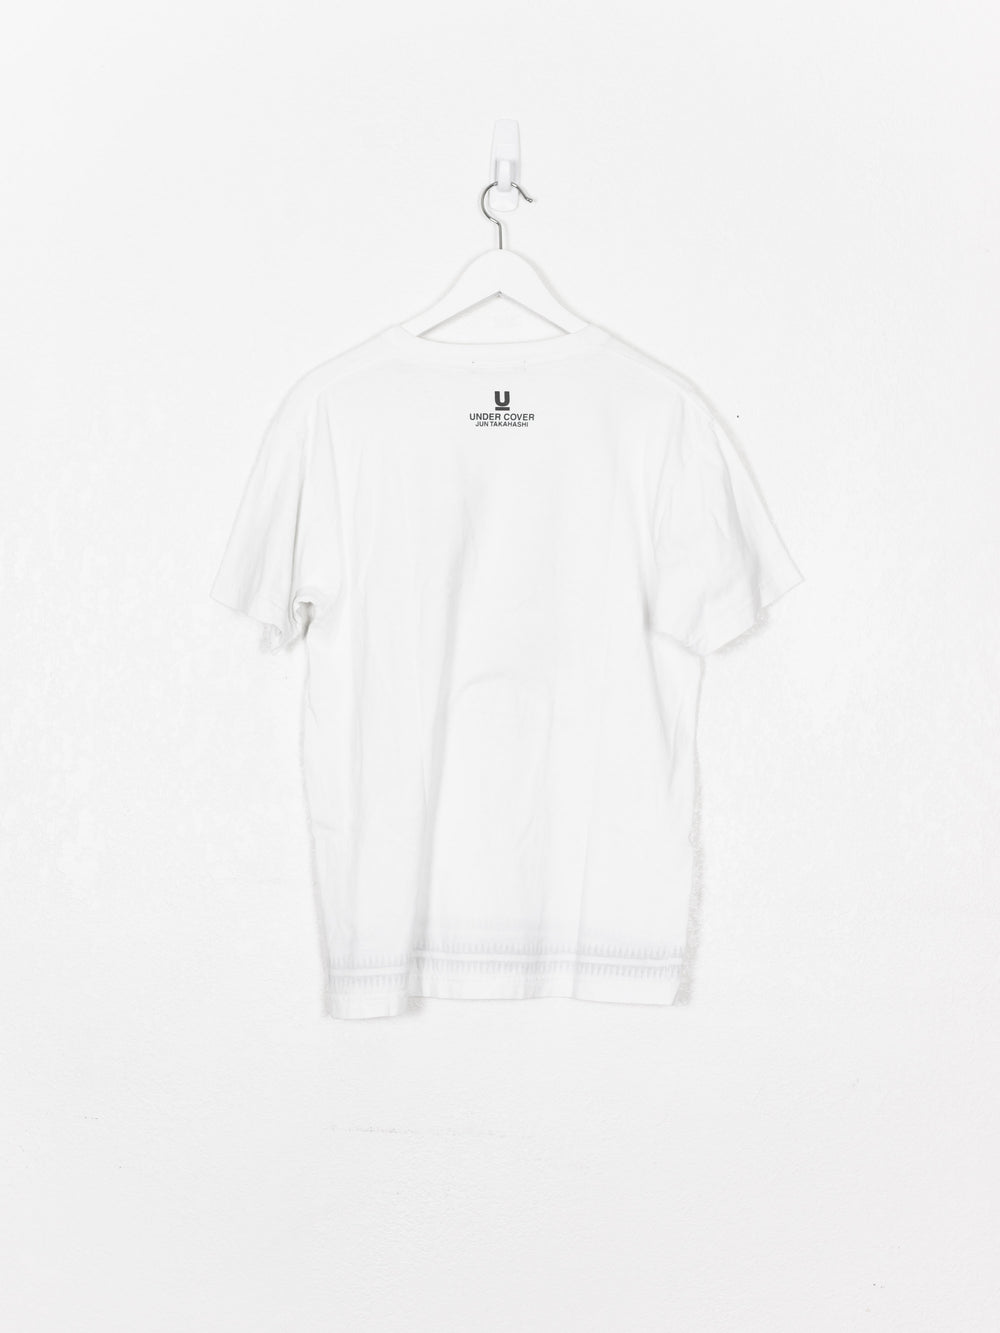 Undercover First Show Giz Tee